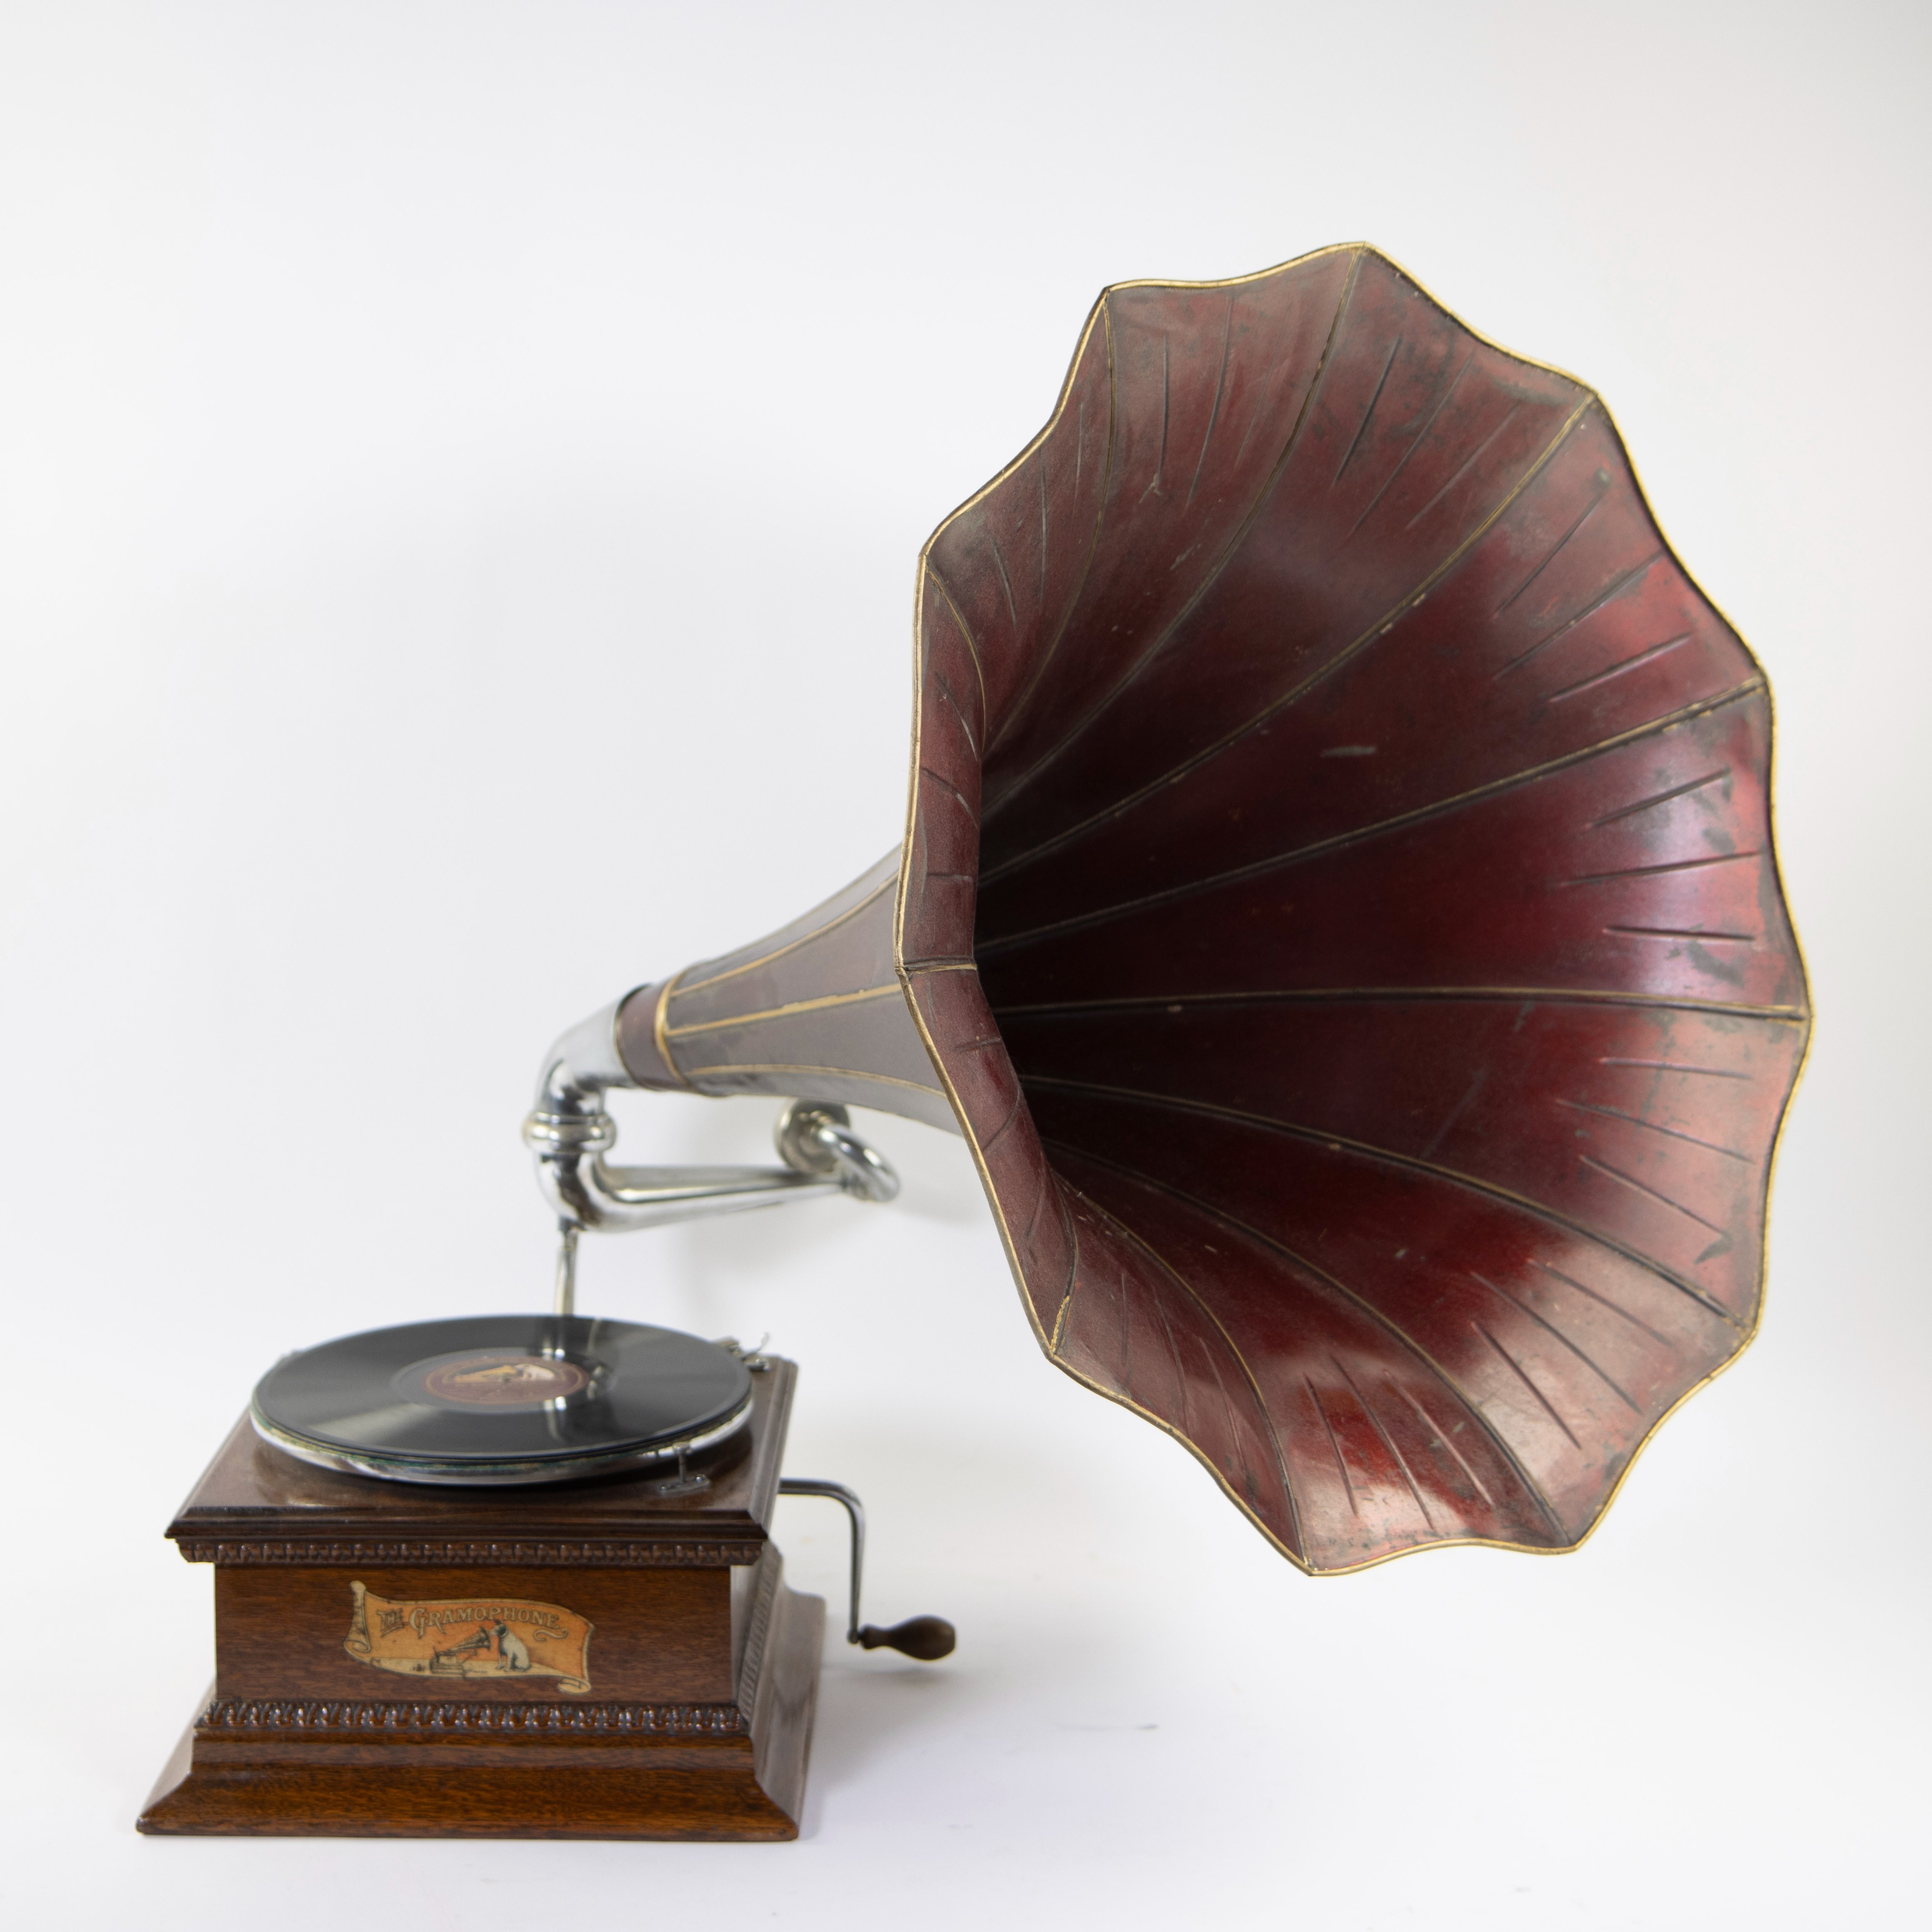 His Masters Voice gramophone in wooden box with copper horn